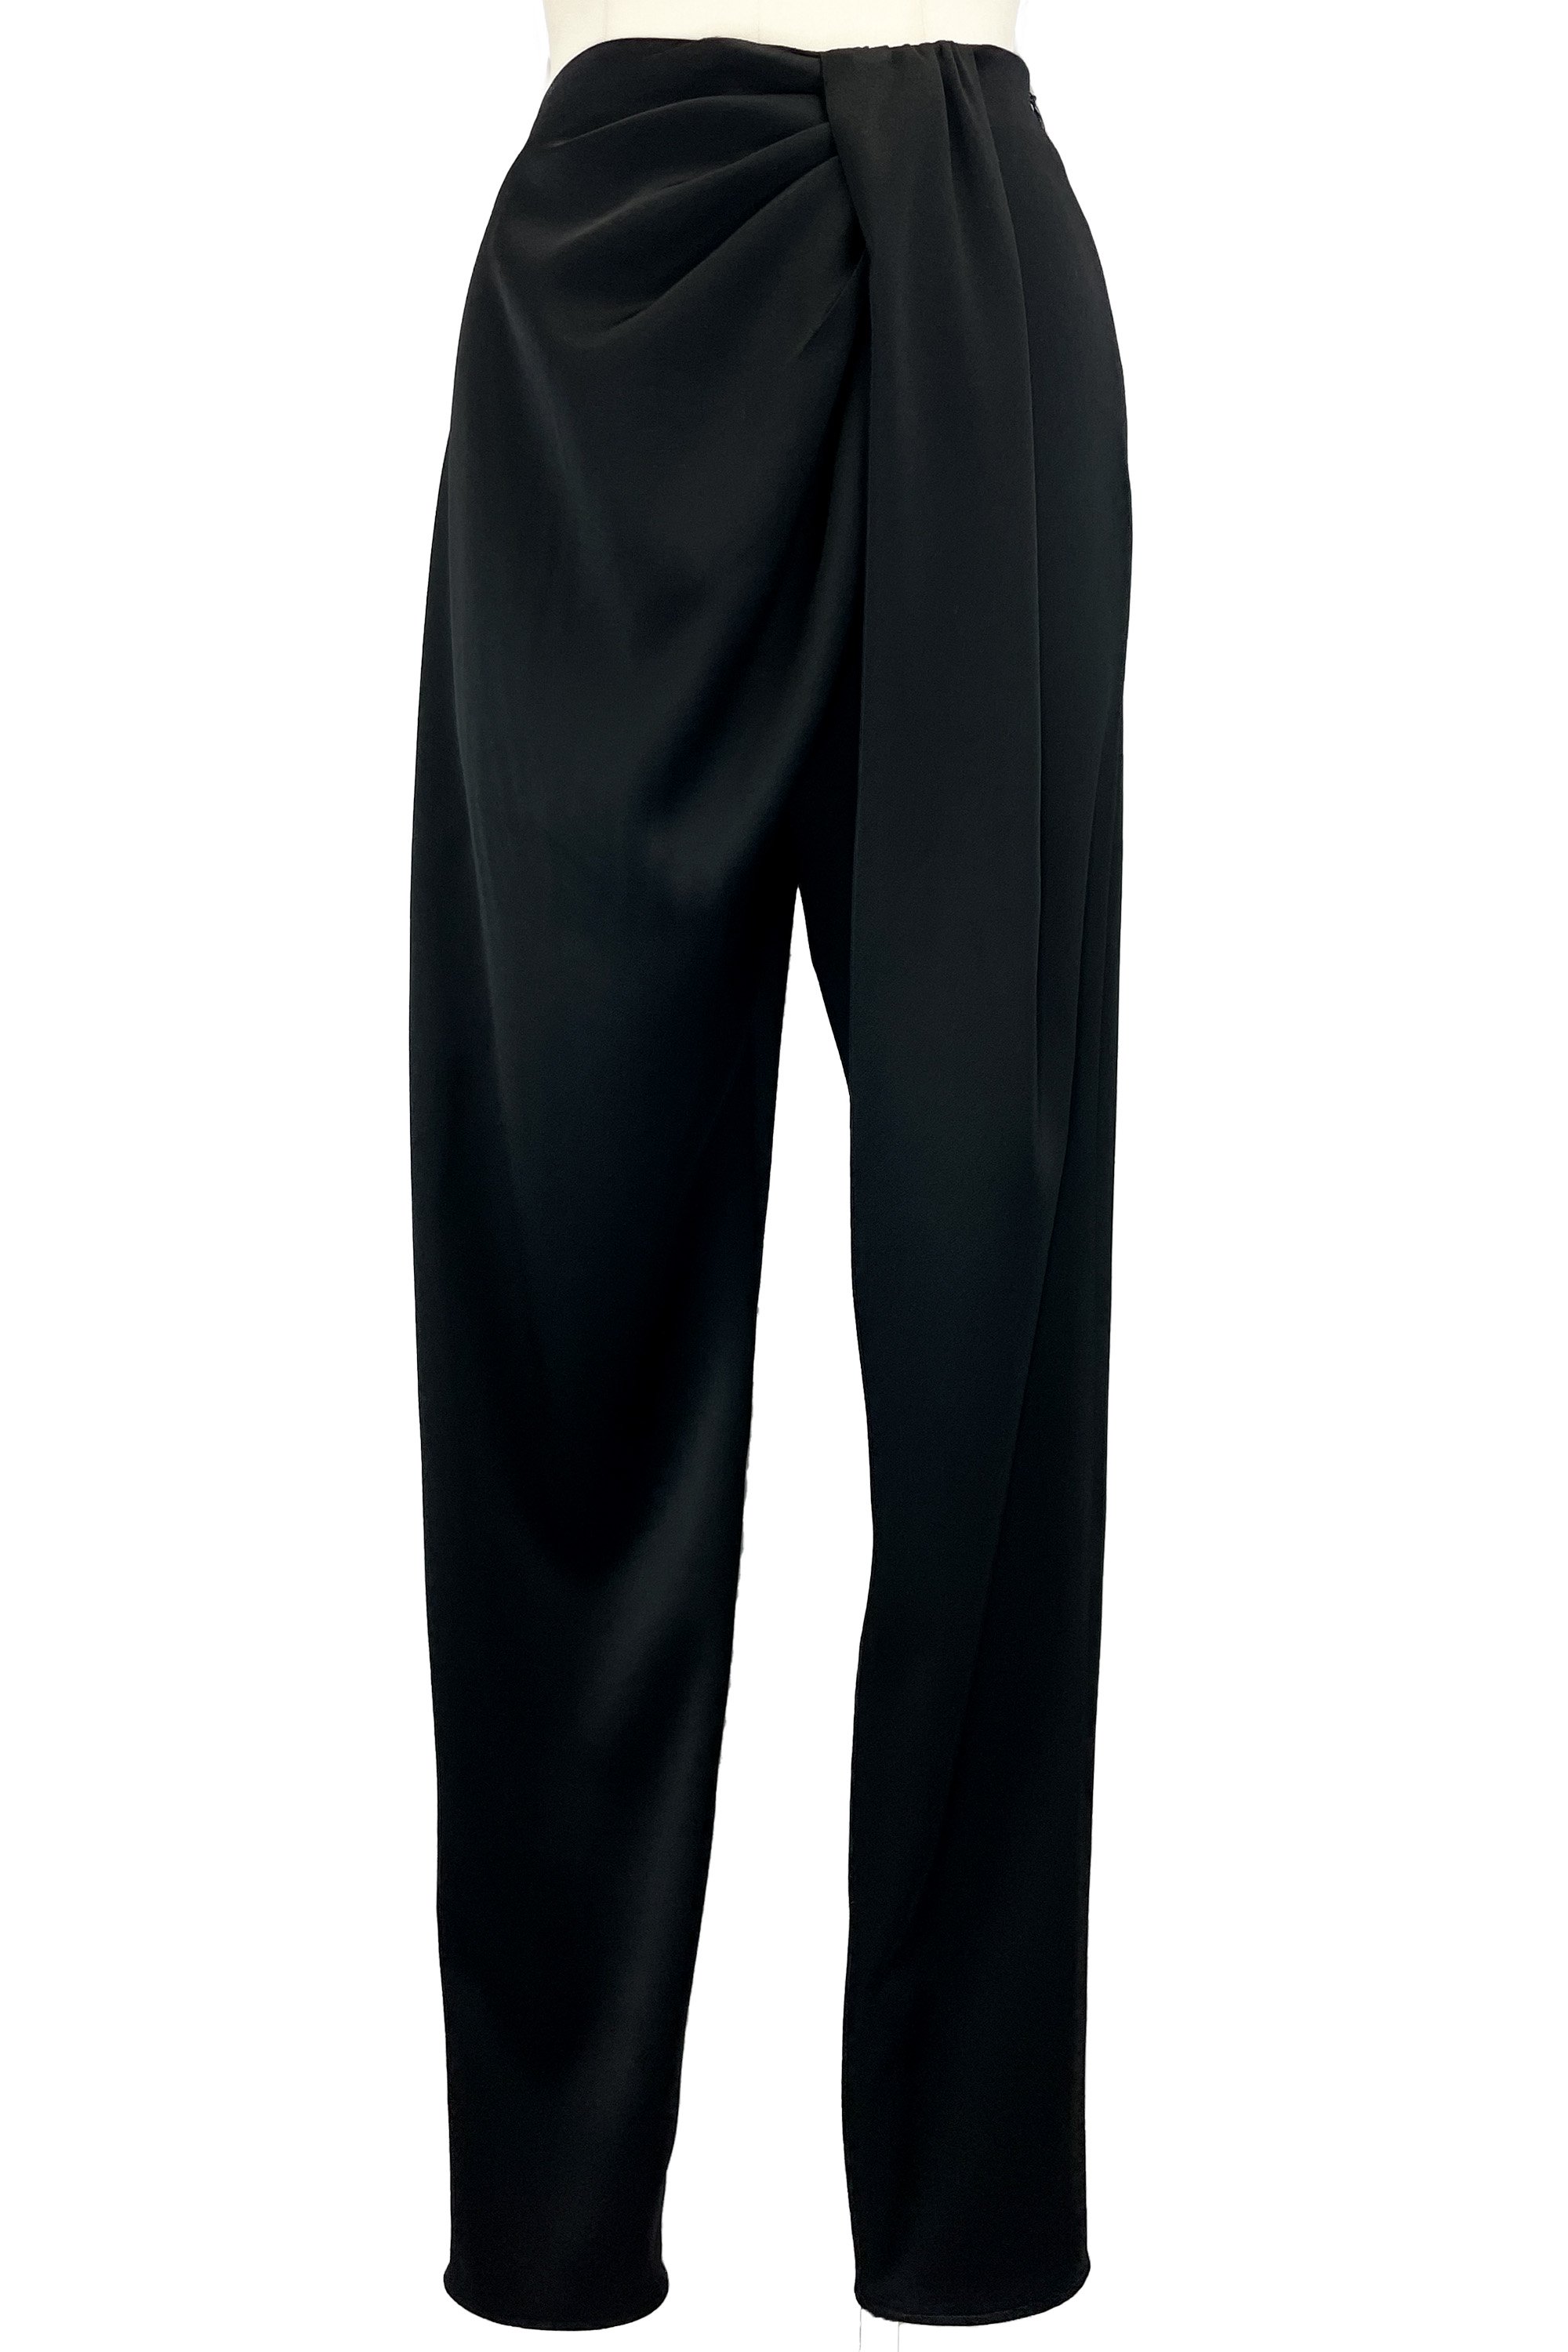 <img class='new_mark_img1' src='https://img.shop-pro.jp/img/new/icons6.gif' style='border:none;display:inline;margin:0px;padding:0px;width:auto;' />f's6  original Drape trousers